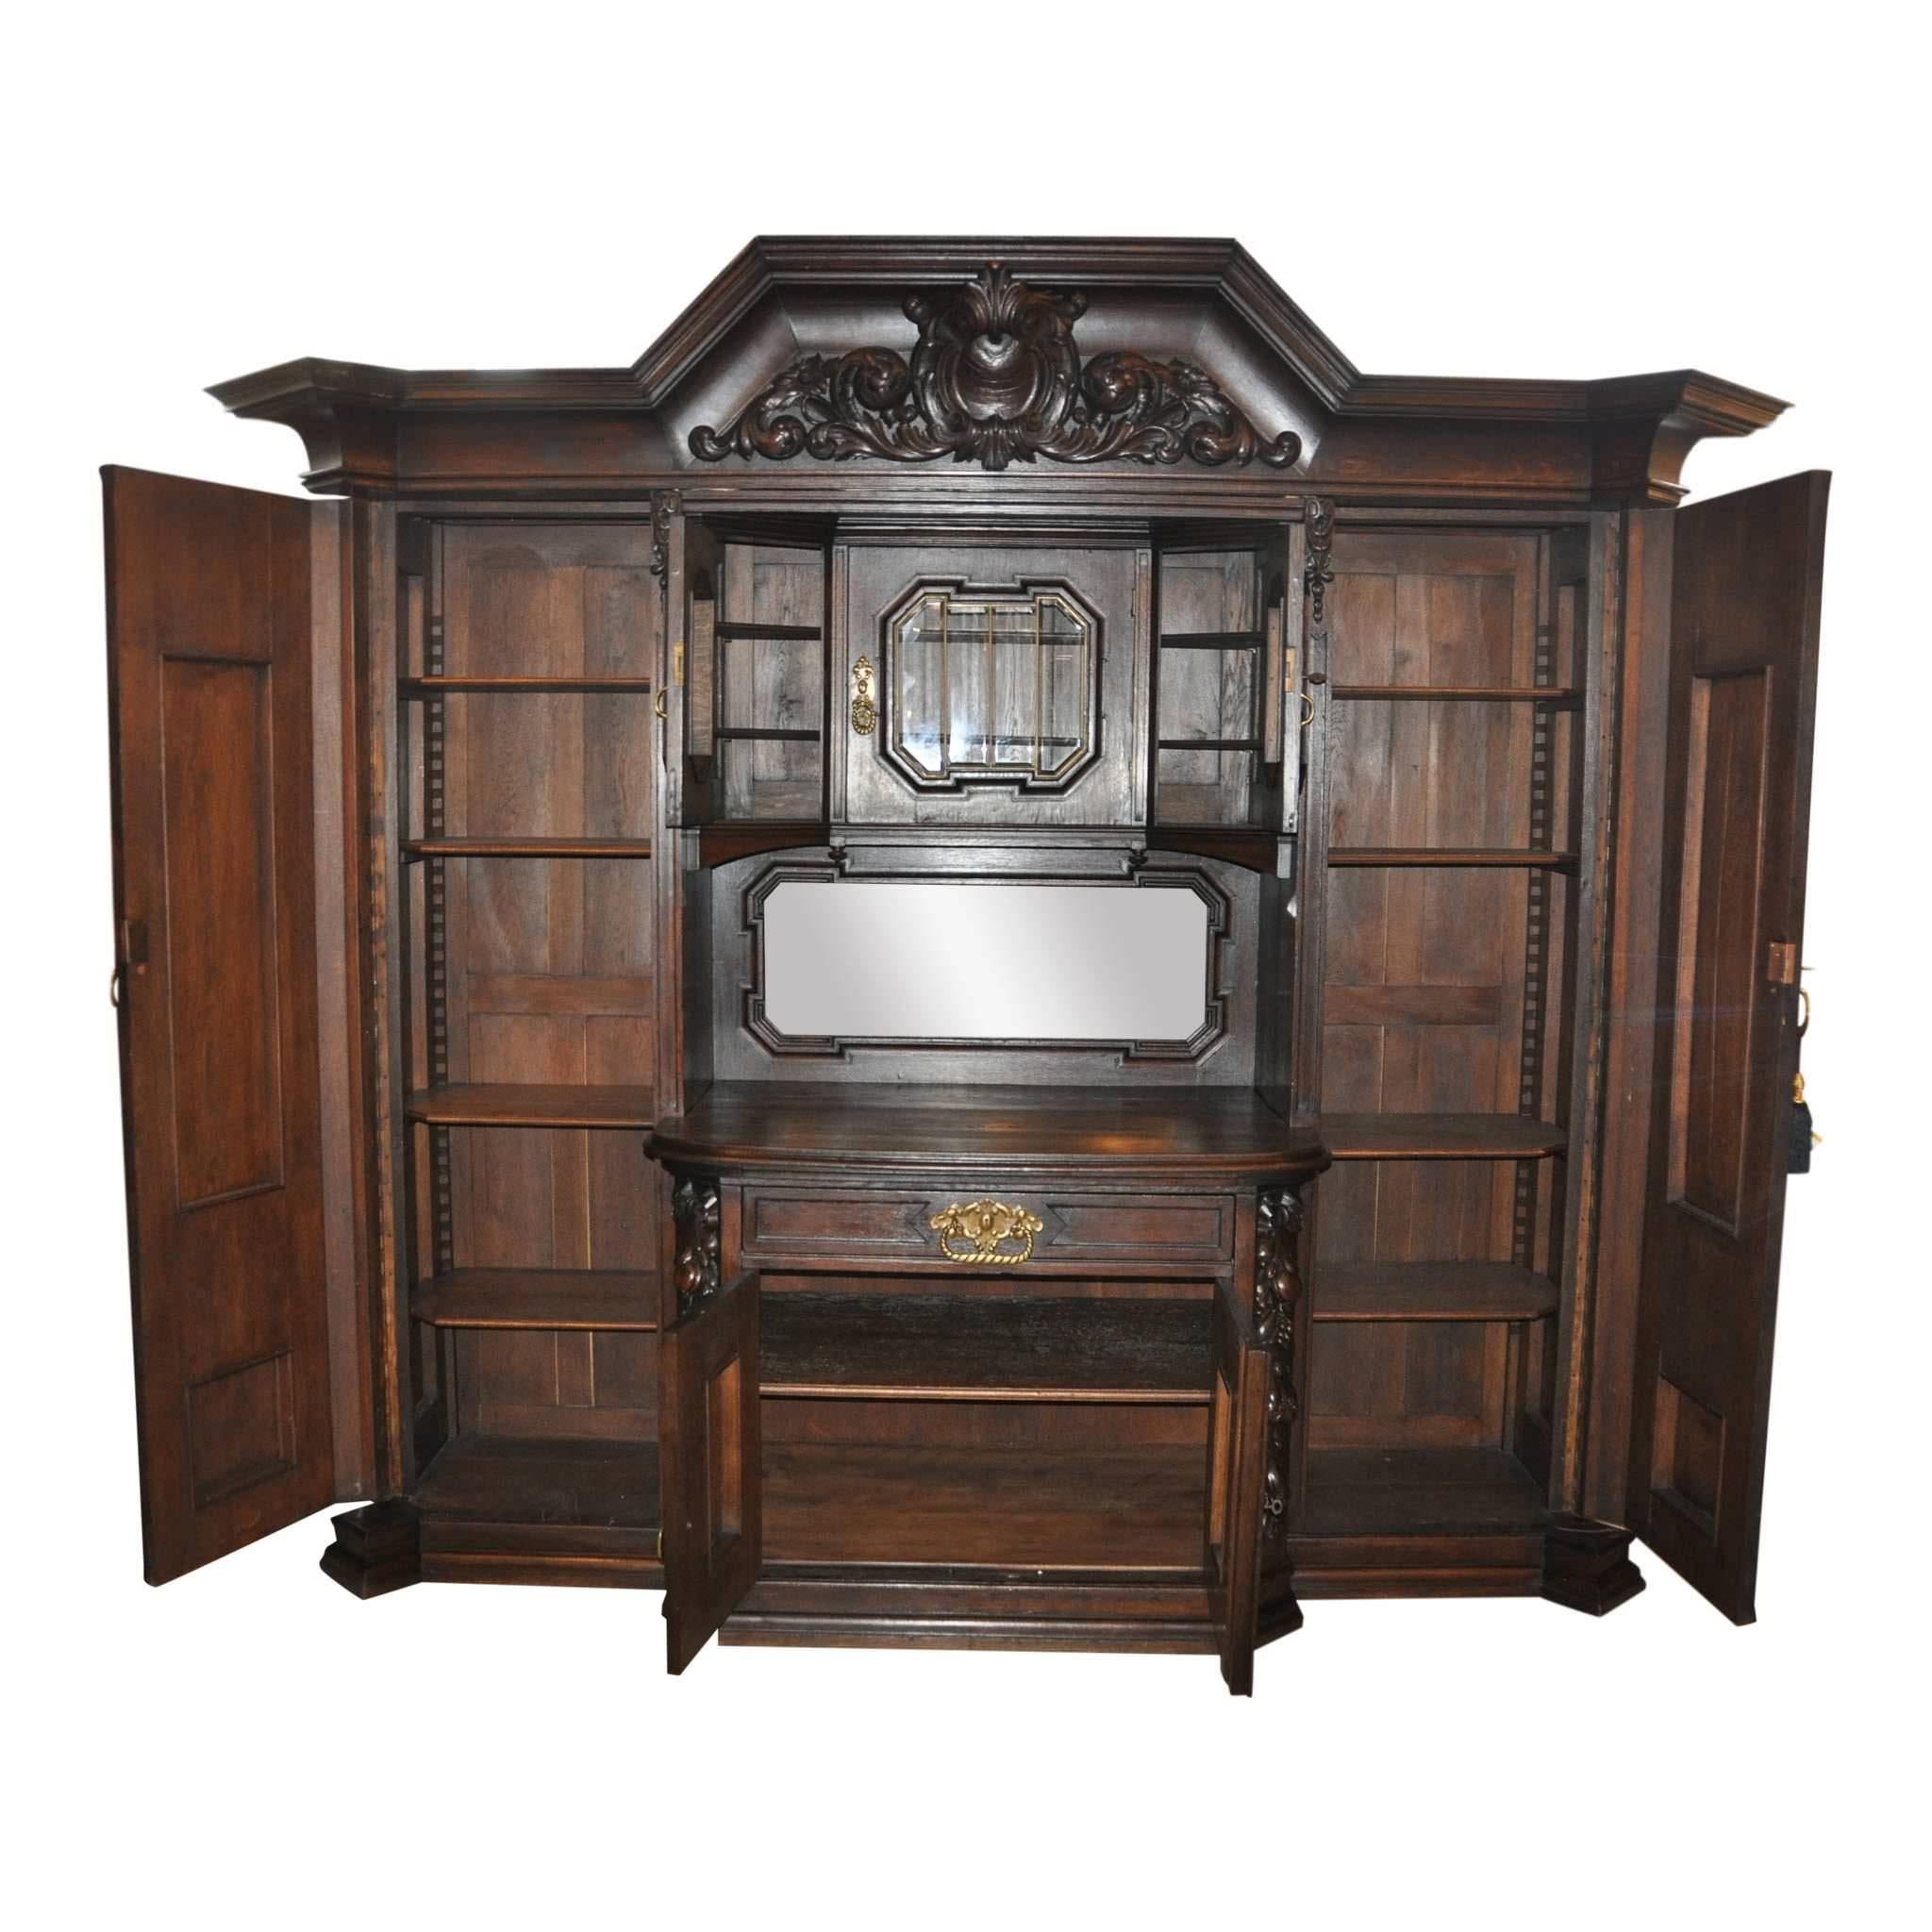 On offer is a large oak wall unit from Danzig Germany. Two large side doors open to reveal four adjustable shelves each. More storage in the upper cabinet surround, with three glass doors and two shelves. The lower case is comprised of a drawer and